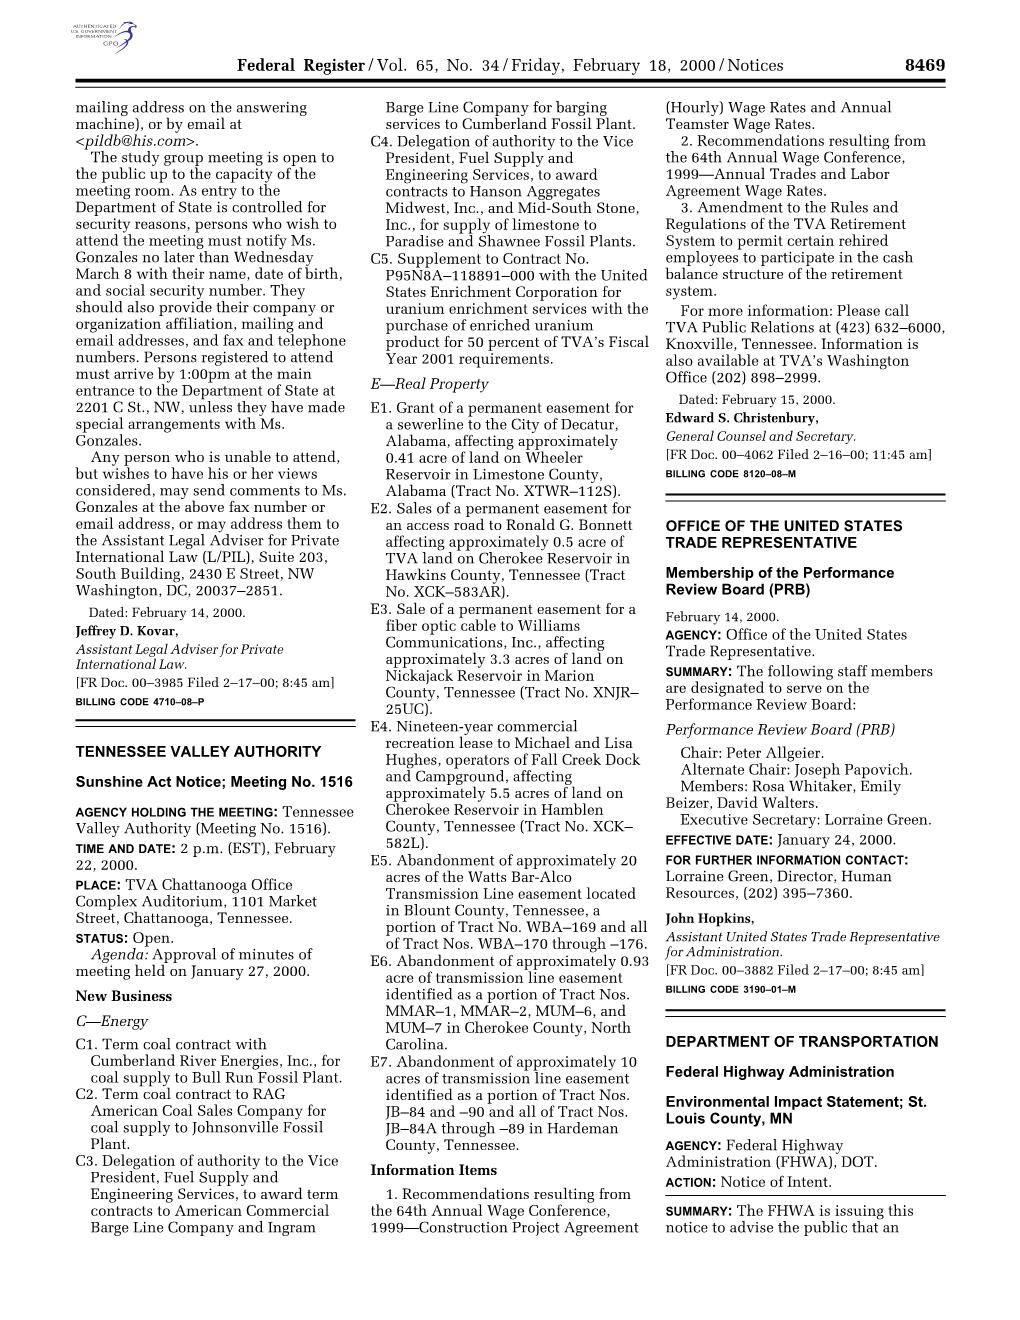 Federal Register/Vol. 65, No. 34/Friday, February 18, 2000/Notices